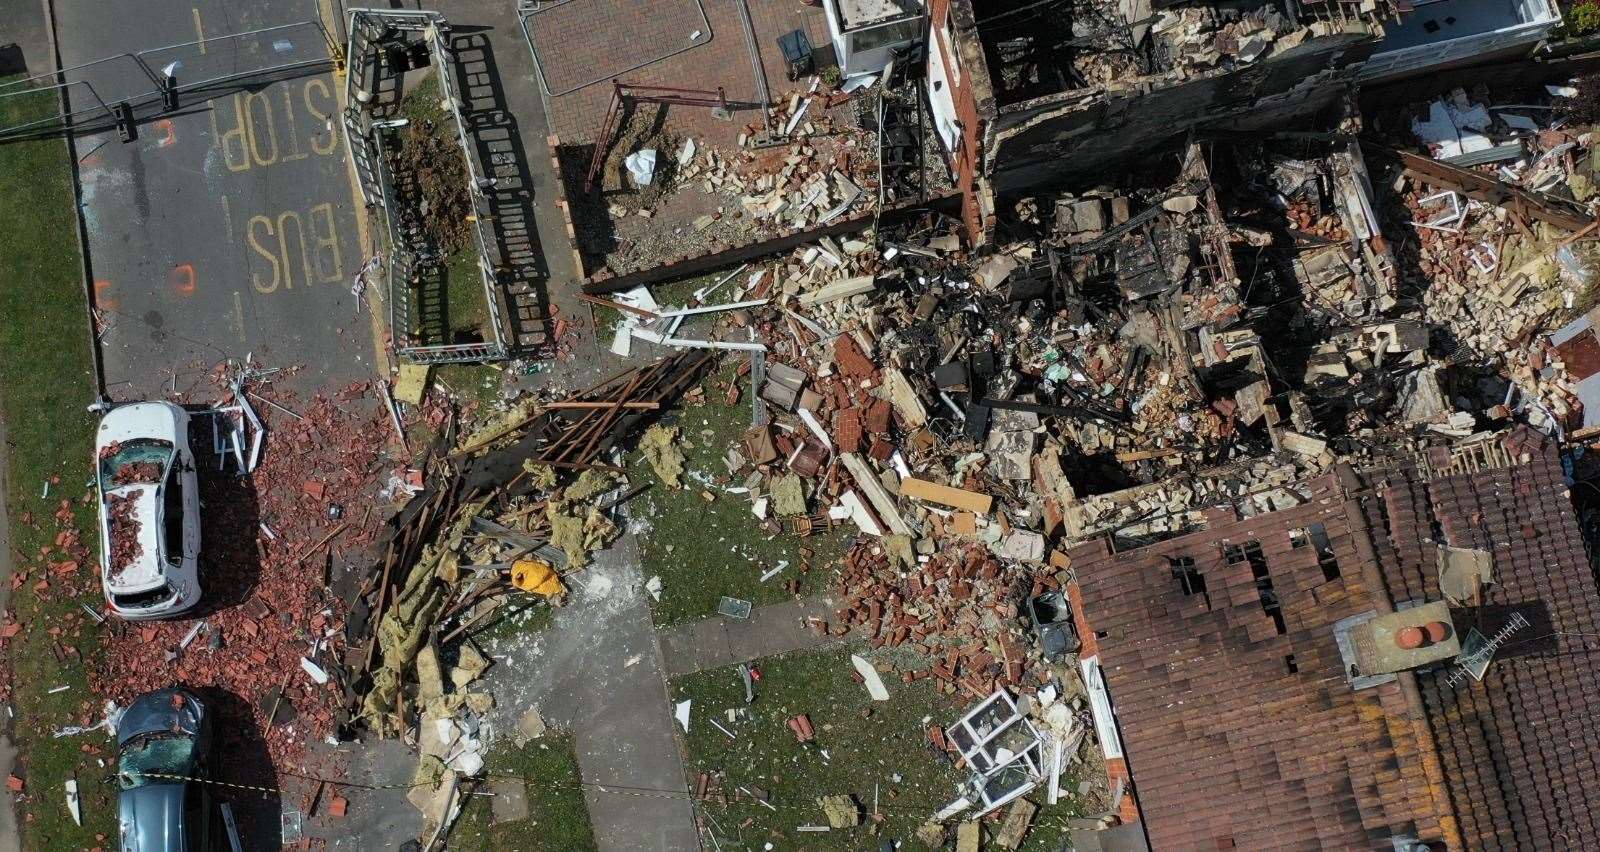 Pictures of the damage left after the house explosion. Picture: UKNiP